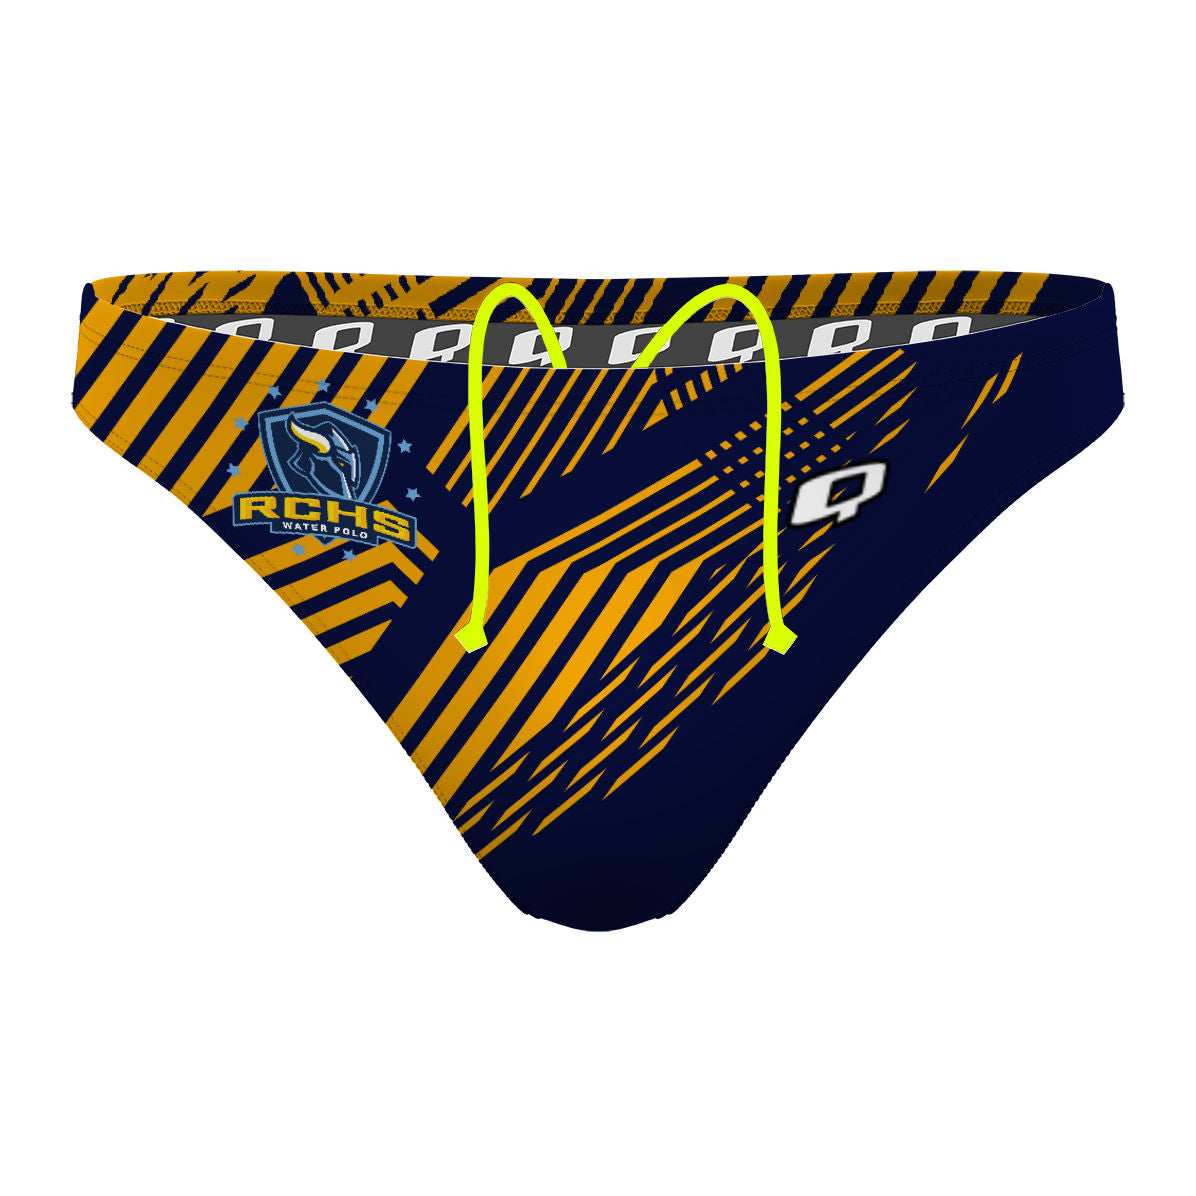 River City High - Waterpolo Brief Swimsuit